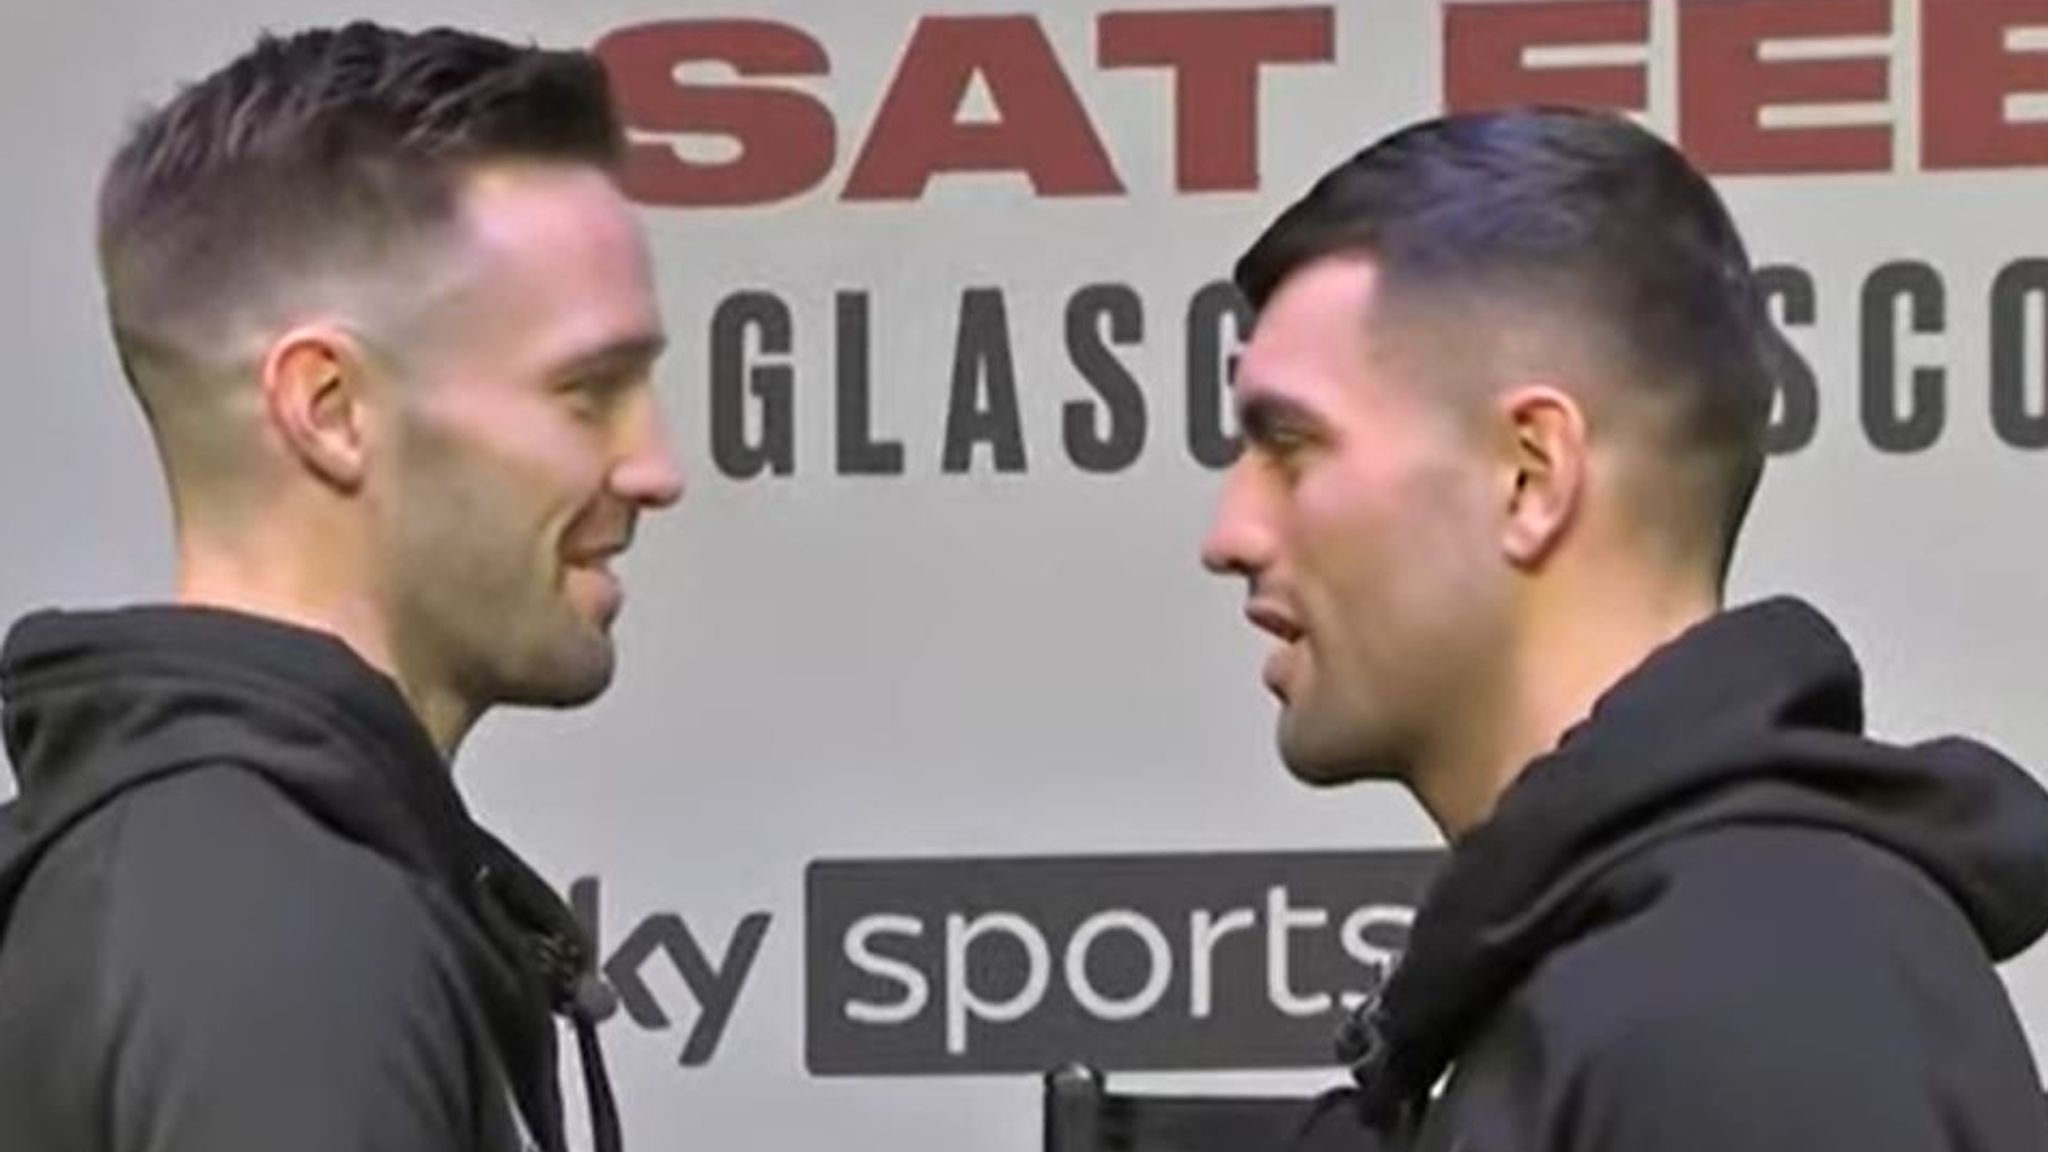 Josh Taylor and José Ramírez collide with boxing history on the line, Boxing